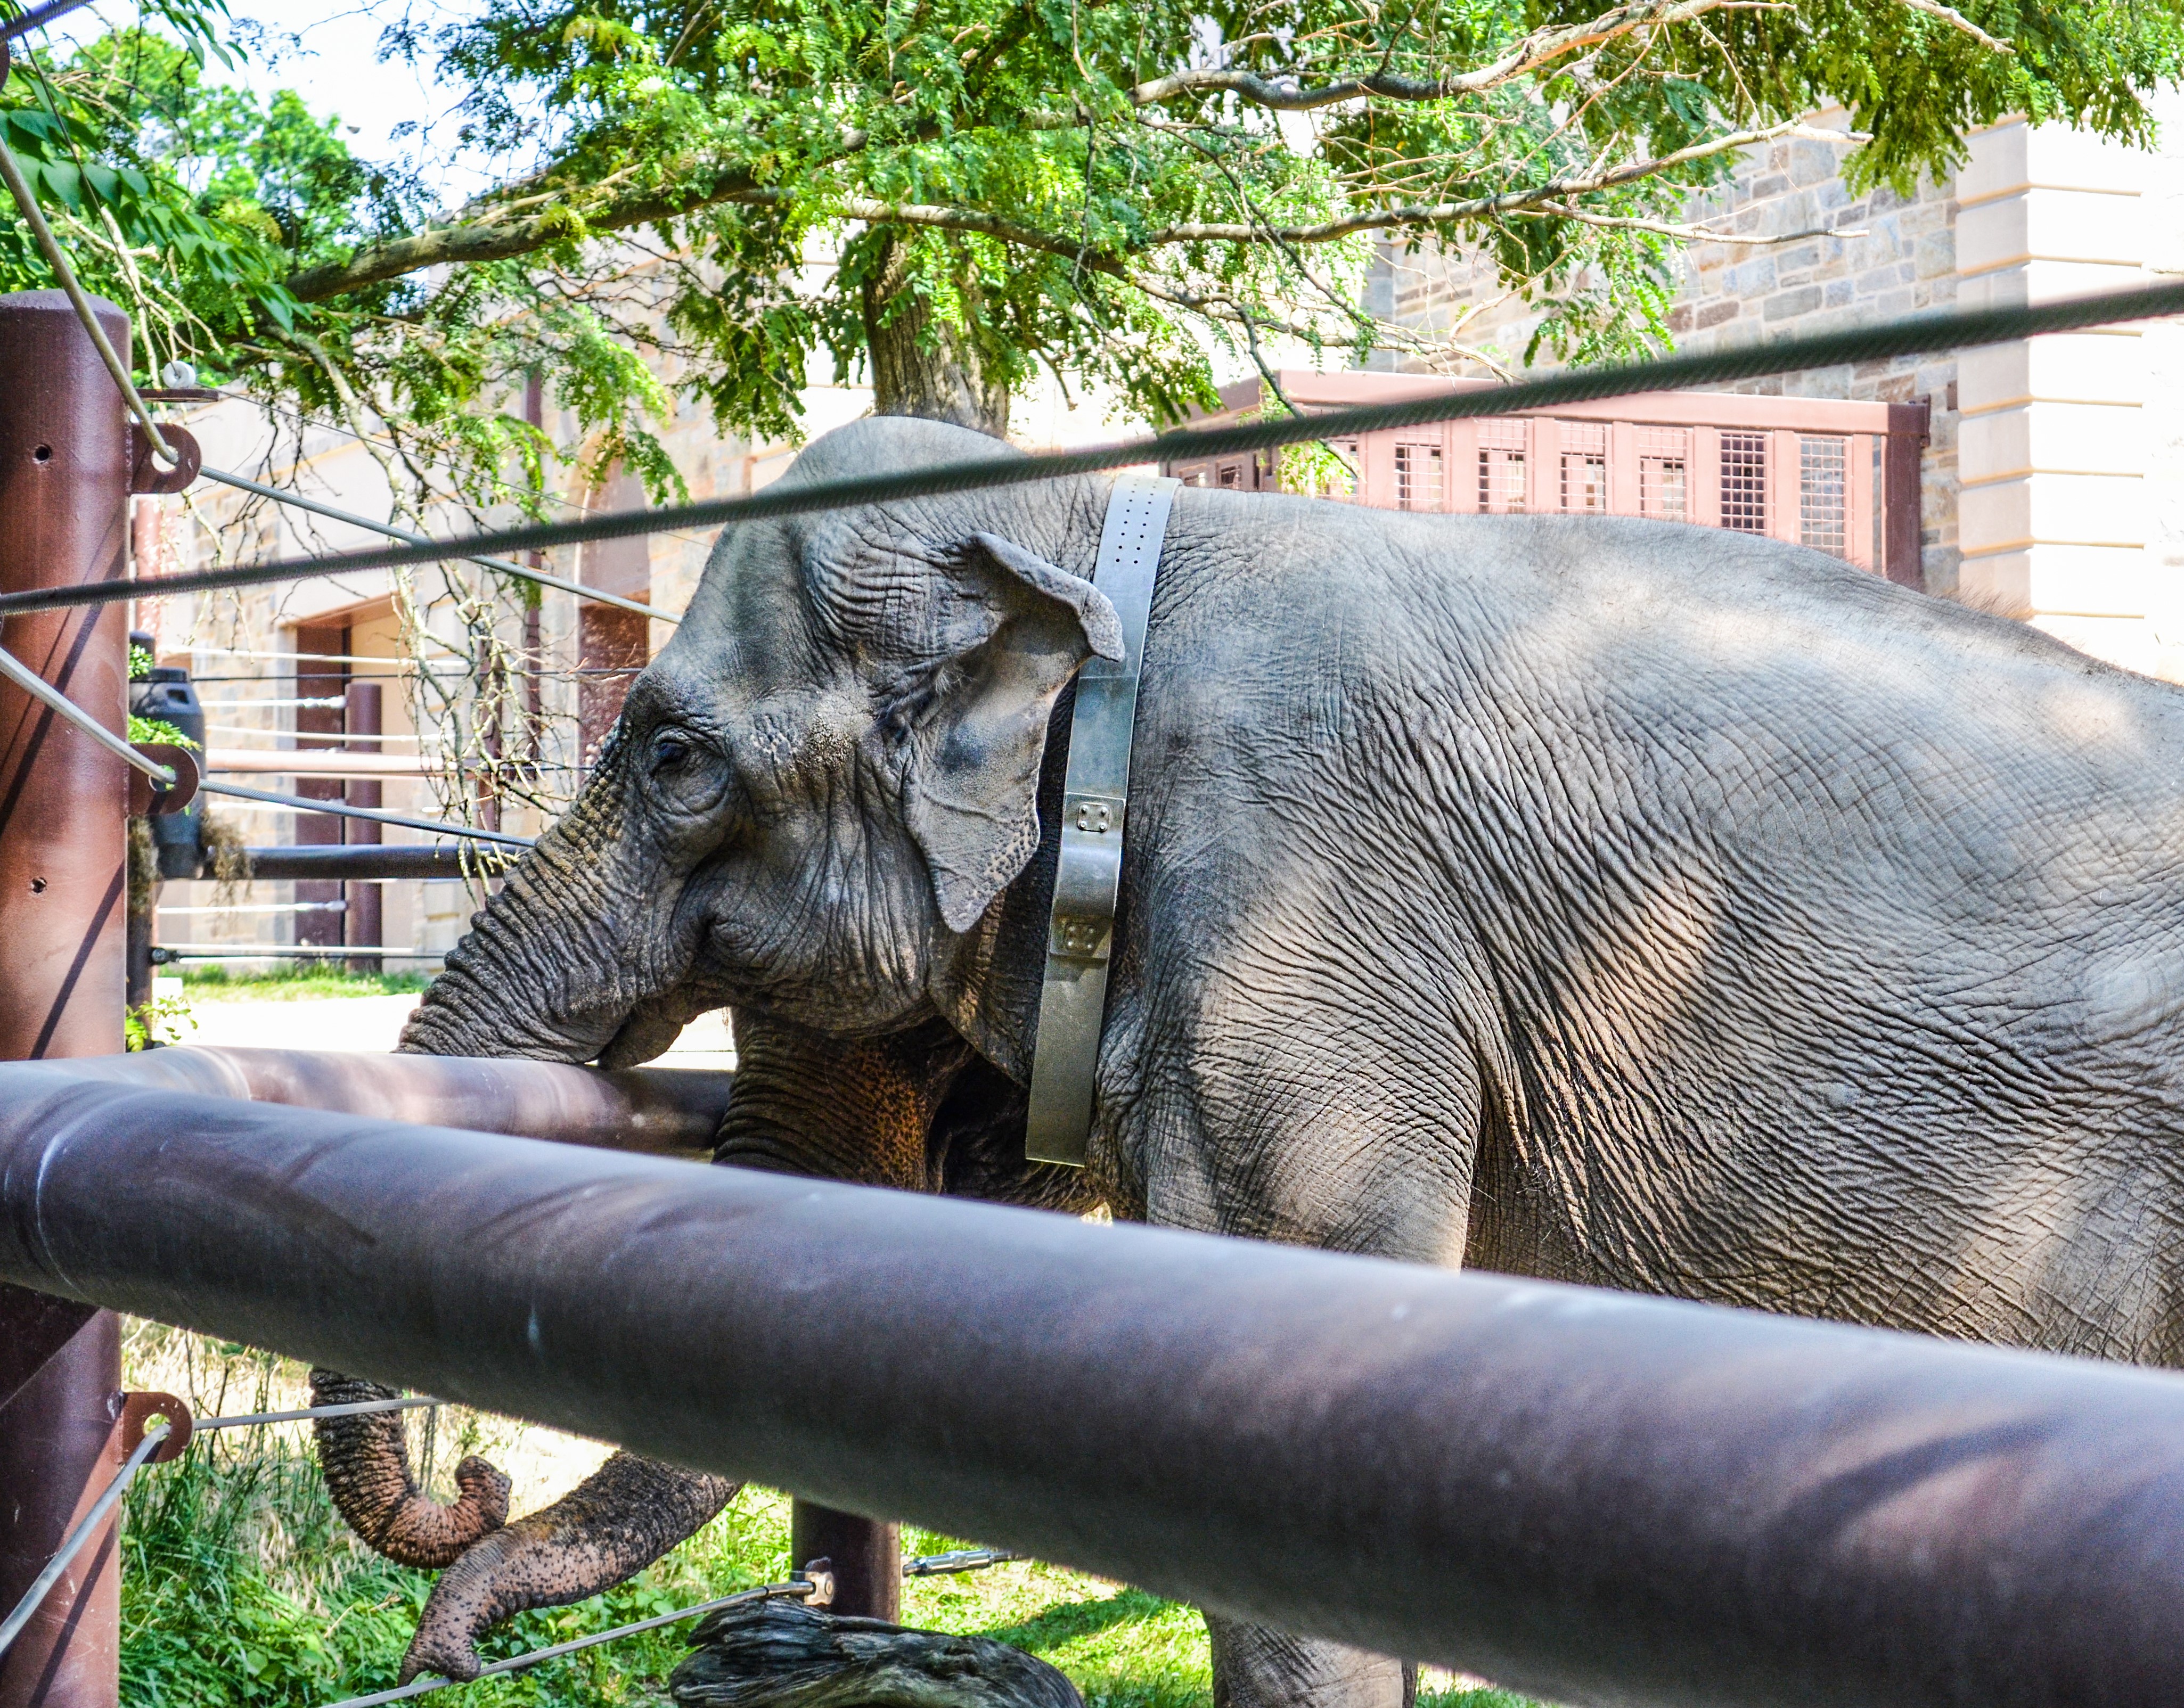 Kamala, a female Asian Elephant, wearing the collar at the National Zoo in Washington D.C.